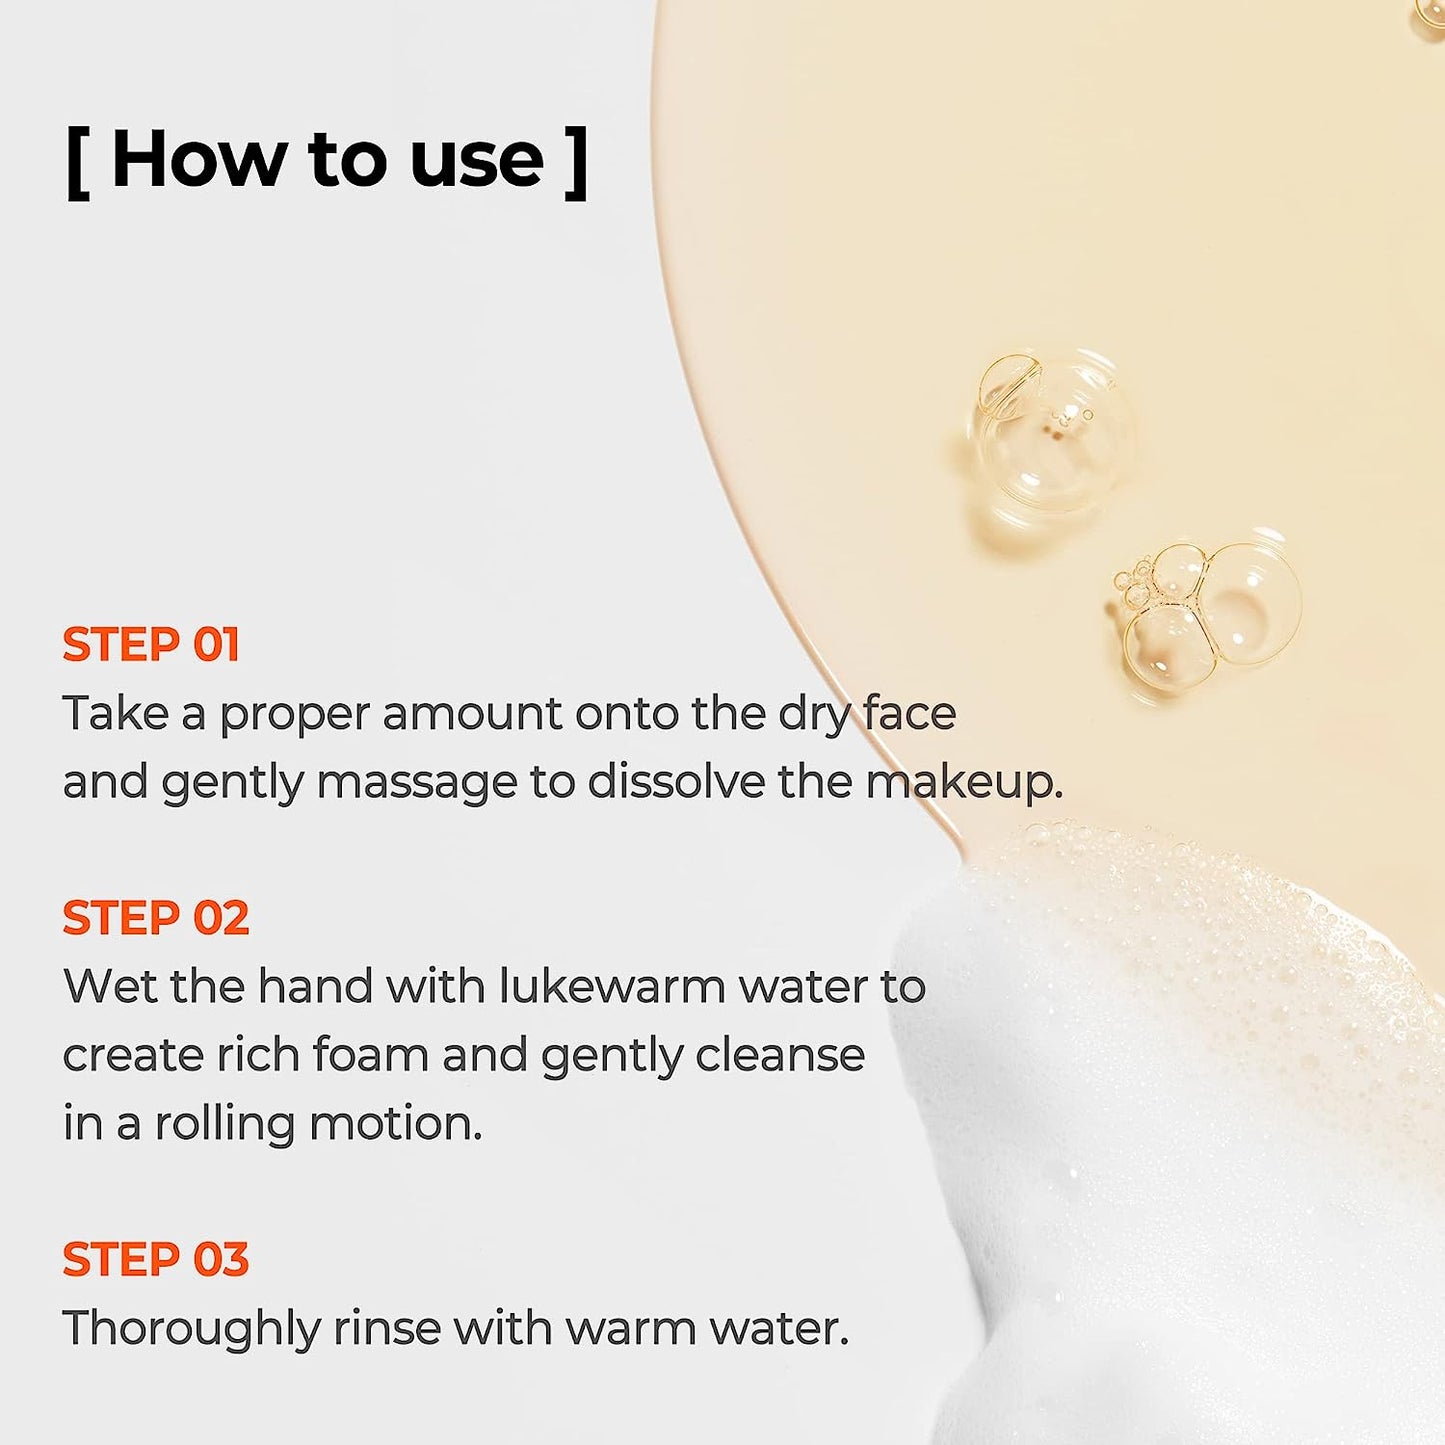 Some By Mi Propolis B5 Foam to Oil cleanser best results when it is applied on dry skin first and gently massage for 5 minutes. Then wet your hands and keep massaging adding more water slowly. When the product has formed foam, massage for a few more minutes and rinse with plenty of water. Repeat one more time for even greater results. 